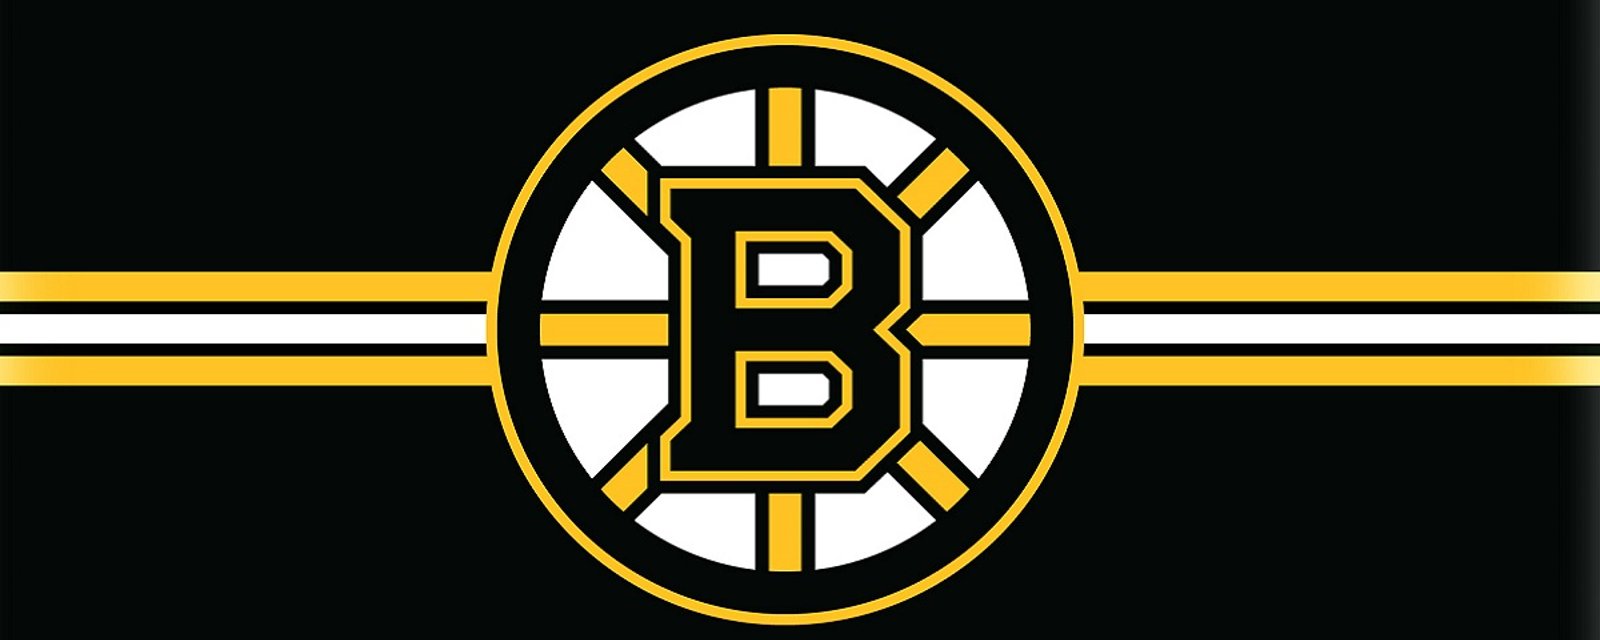 Breaking: Bruins forward out “long-term” due to injury.